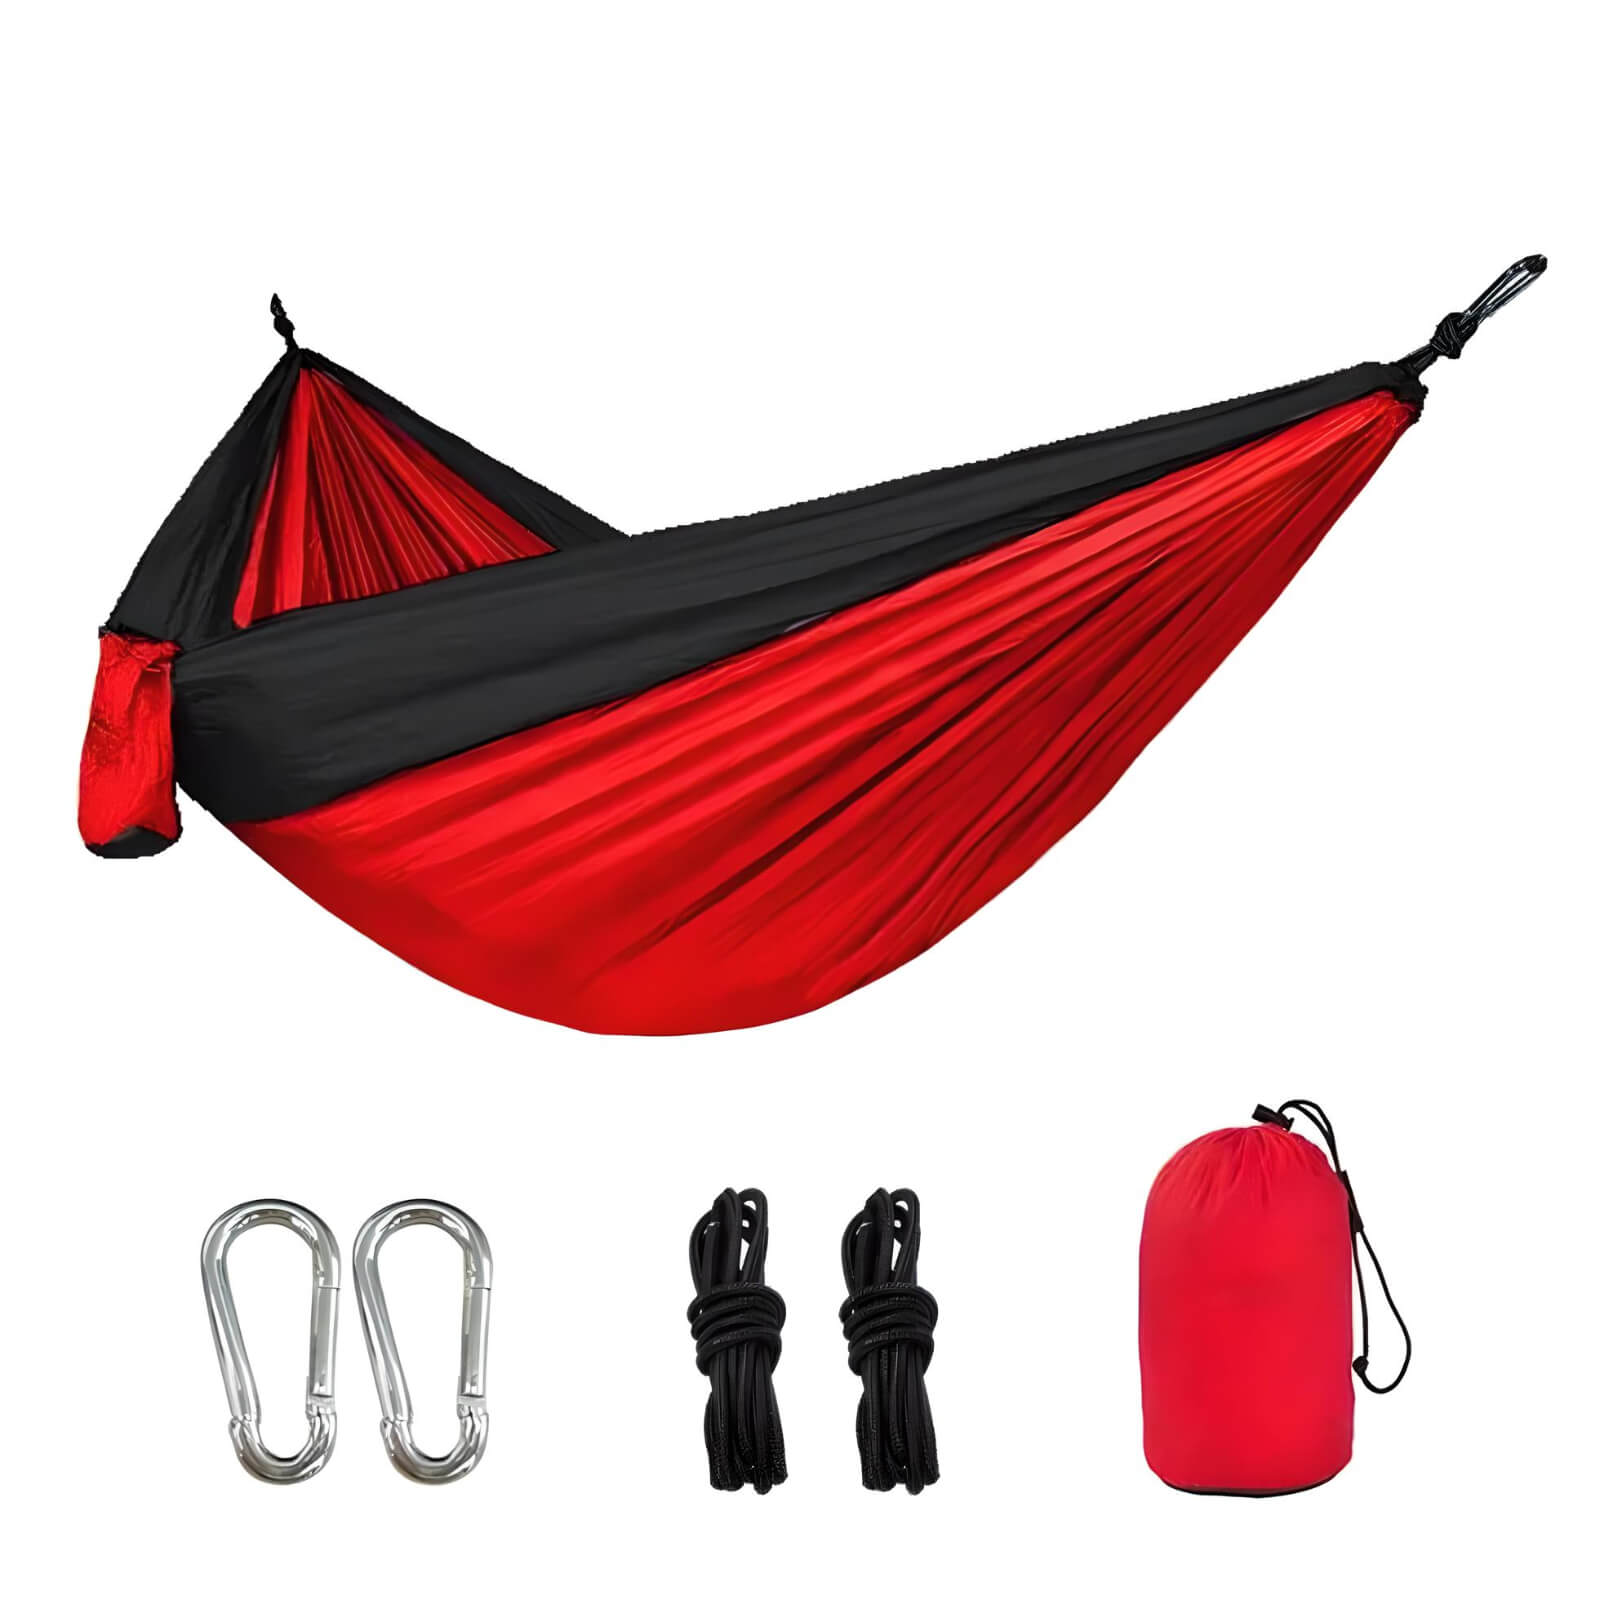 light-weight-back-packing-hammock-red-color